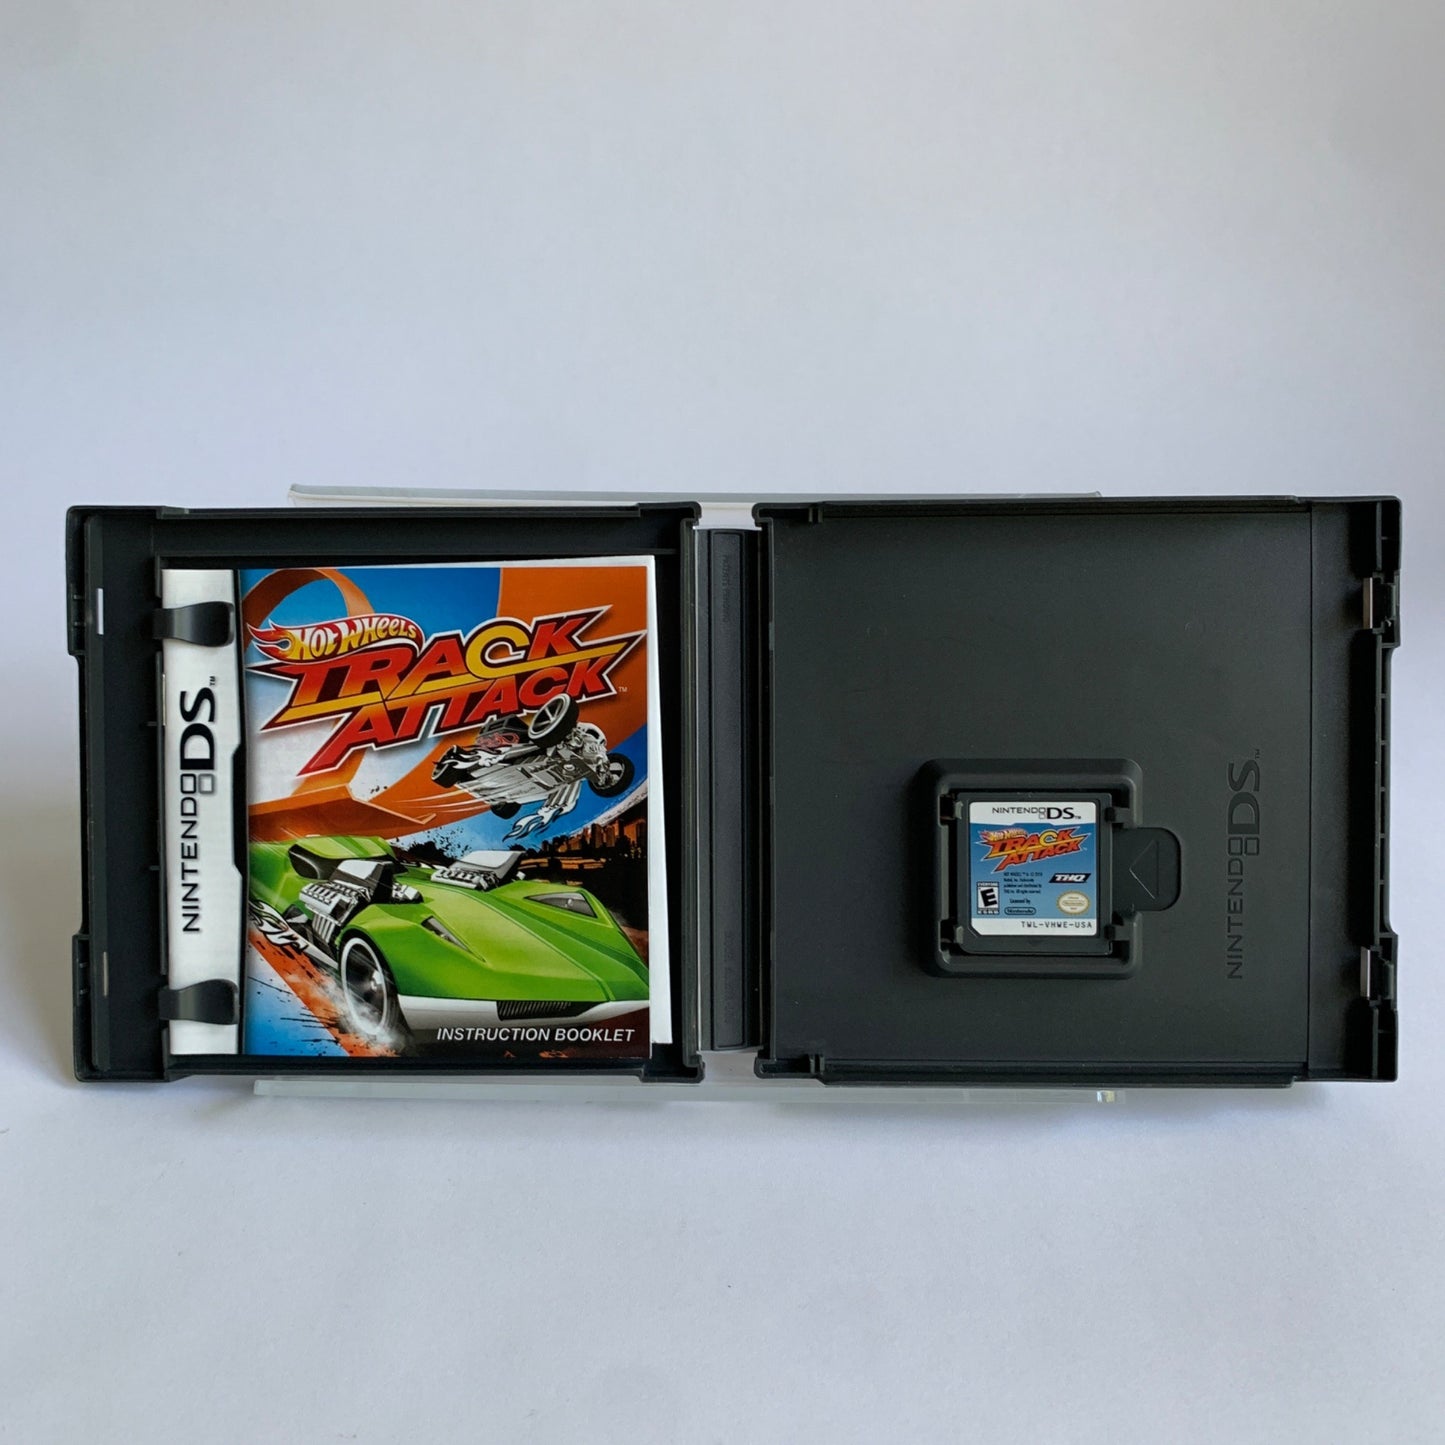 Nintendo DS Hot Wheels Track Attack COMPLETE Cartridge Manual Case